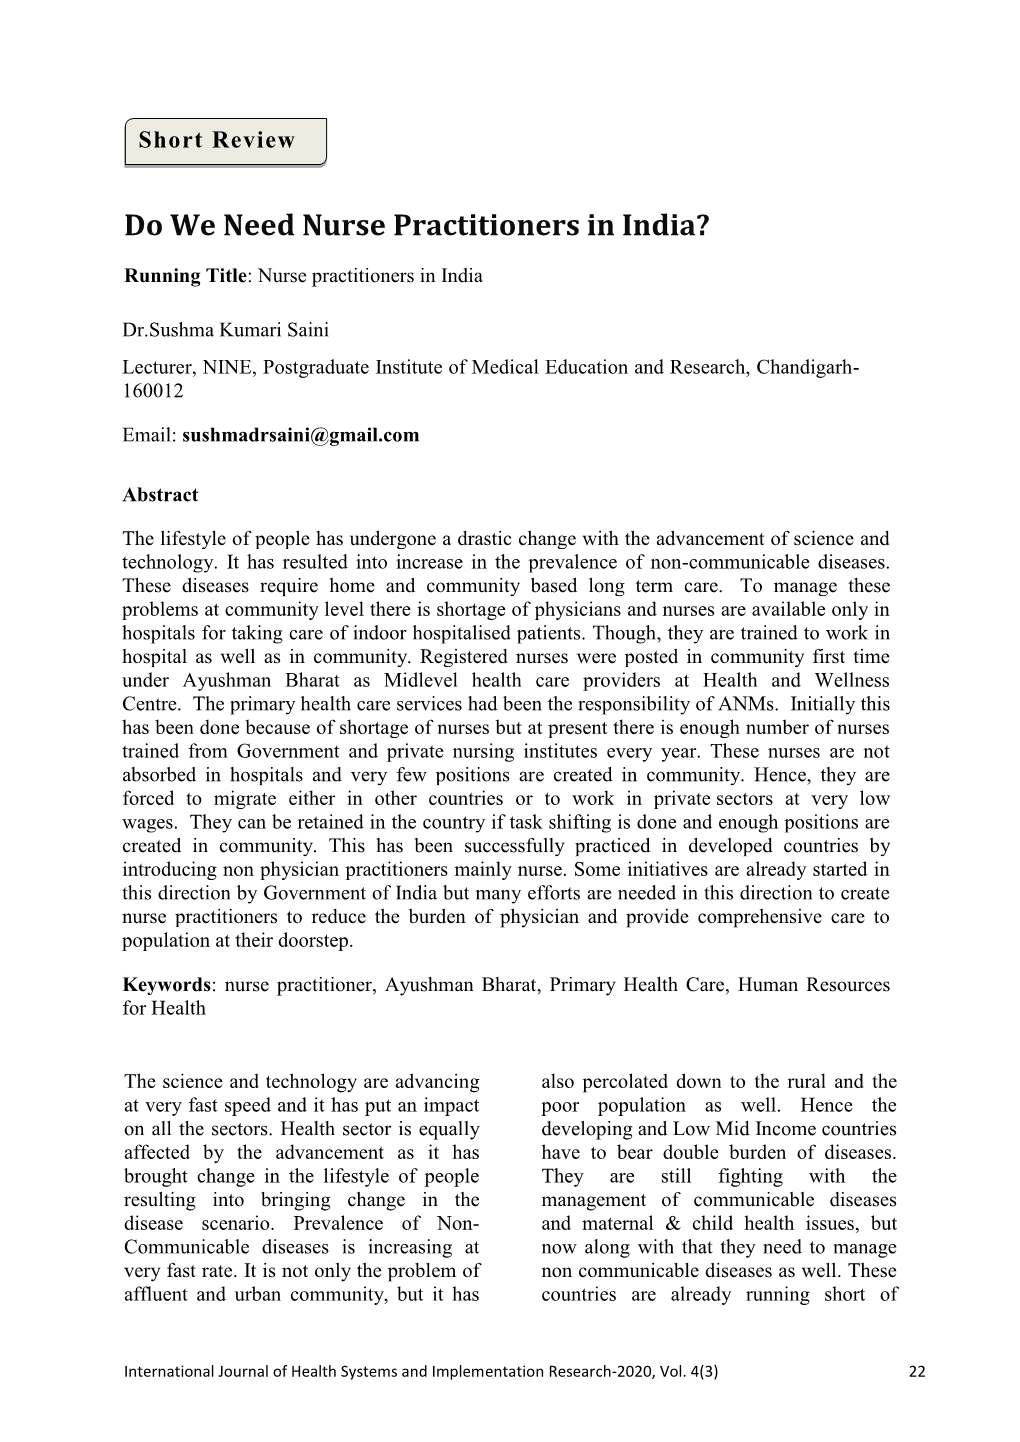 Do We Need Nurse Practitioners in India?